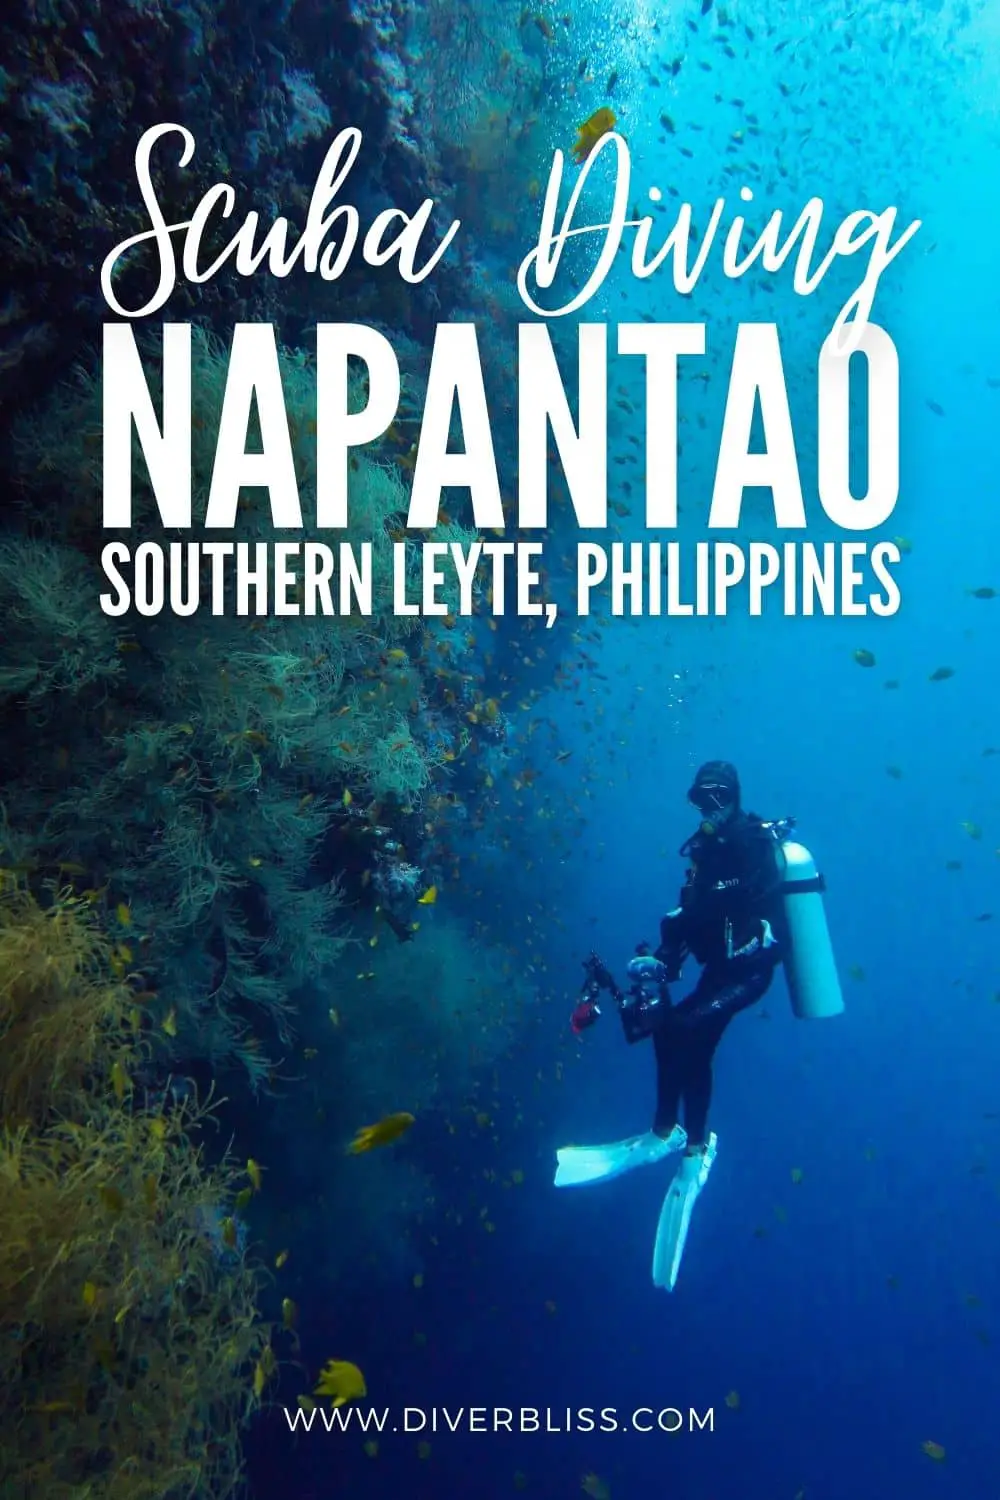 scuba diving napantao southern leyte philippines